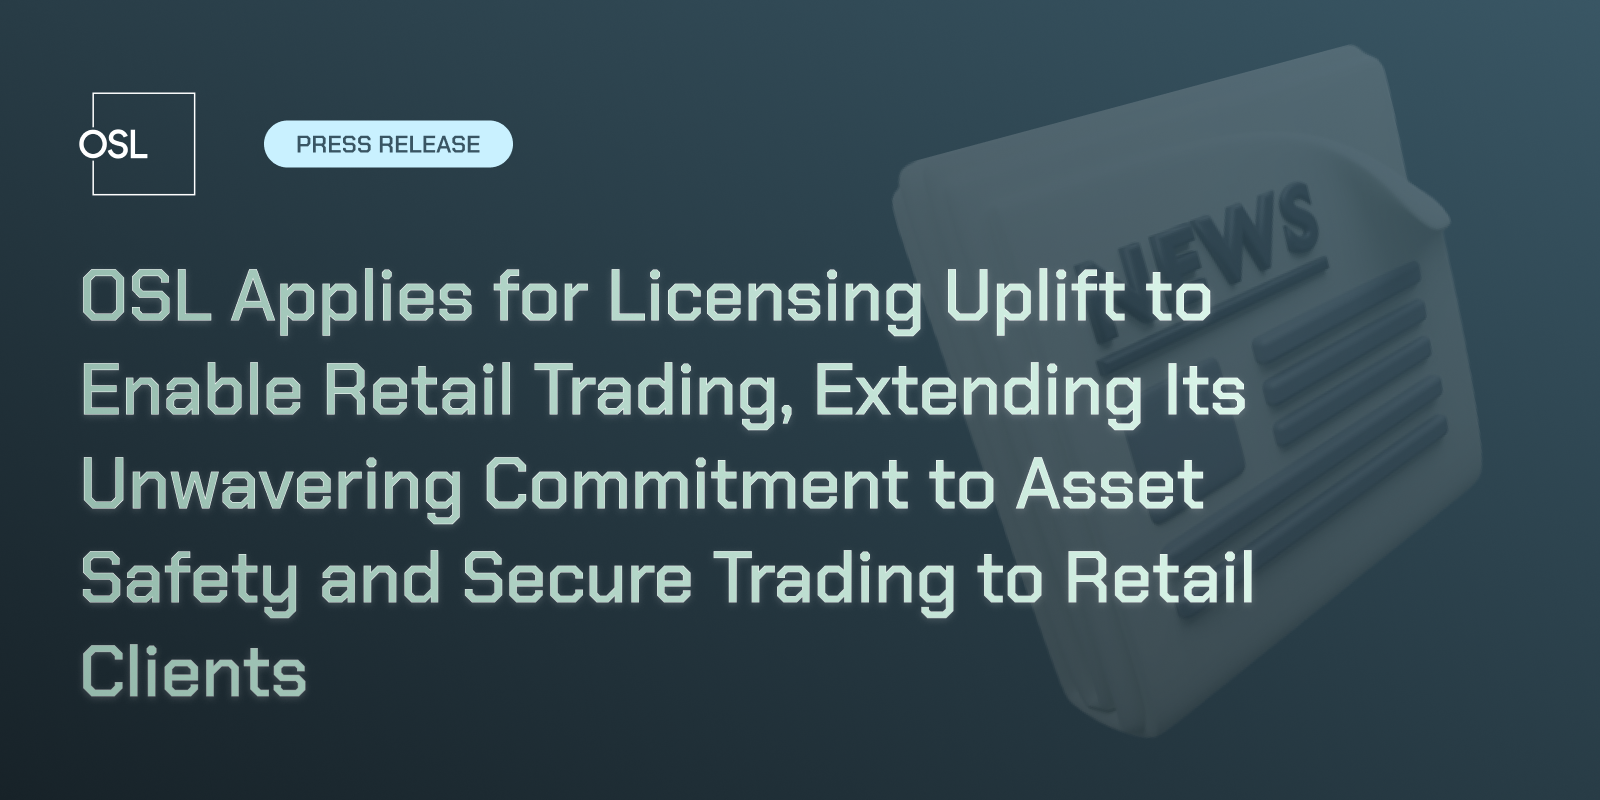 OSL Applies for Licensing Uplift to Enable Retail Trading, Extending Its Unwavering Commitment to Asset Safety and Secure Trading to Retail Clients